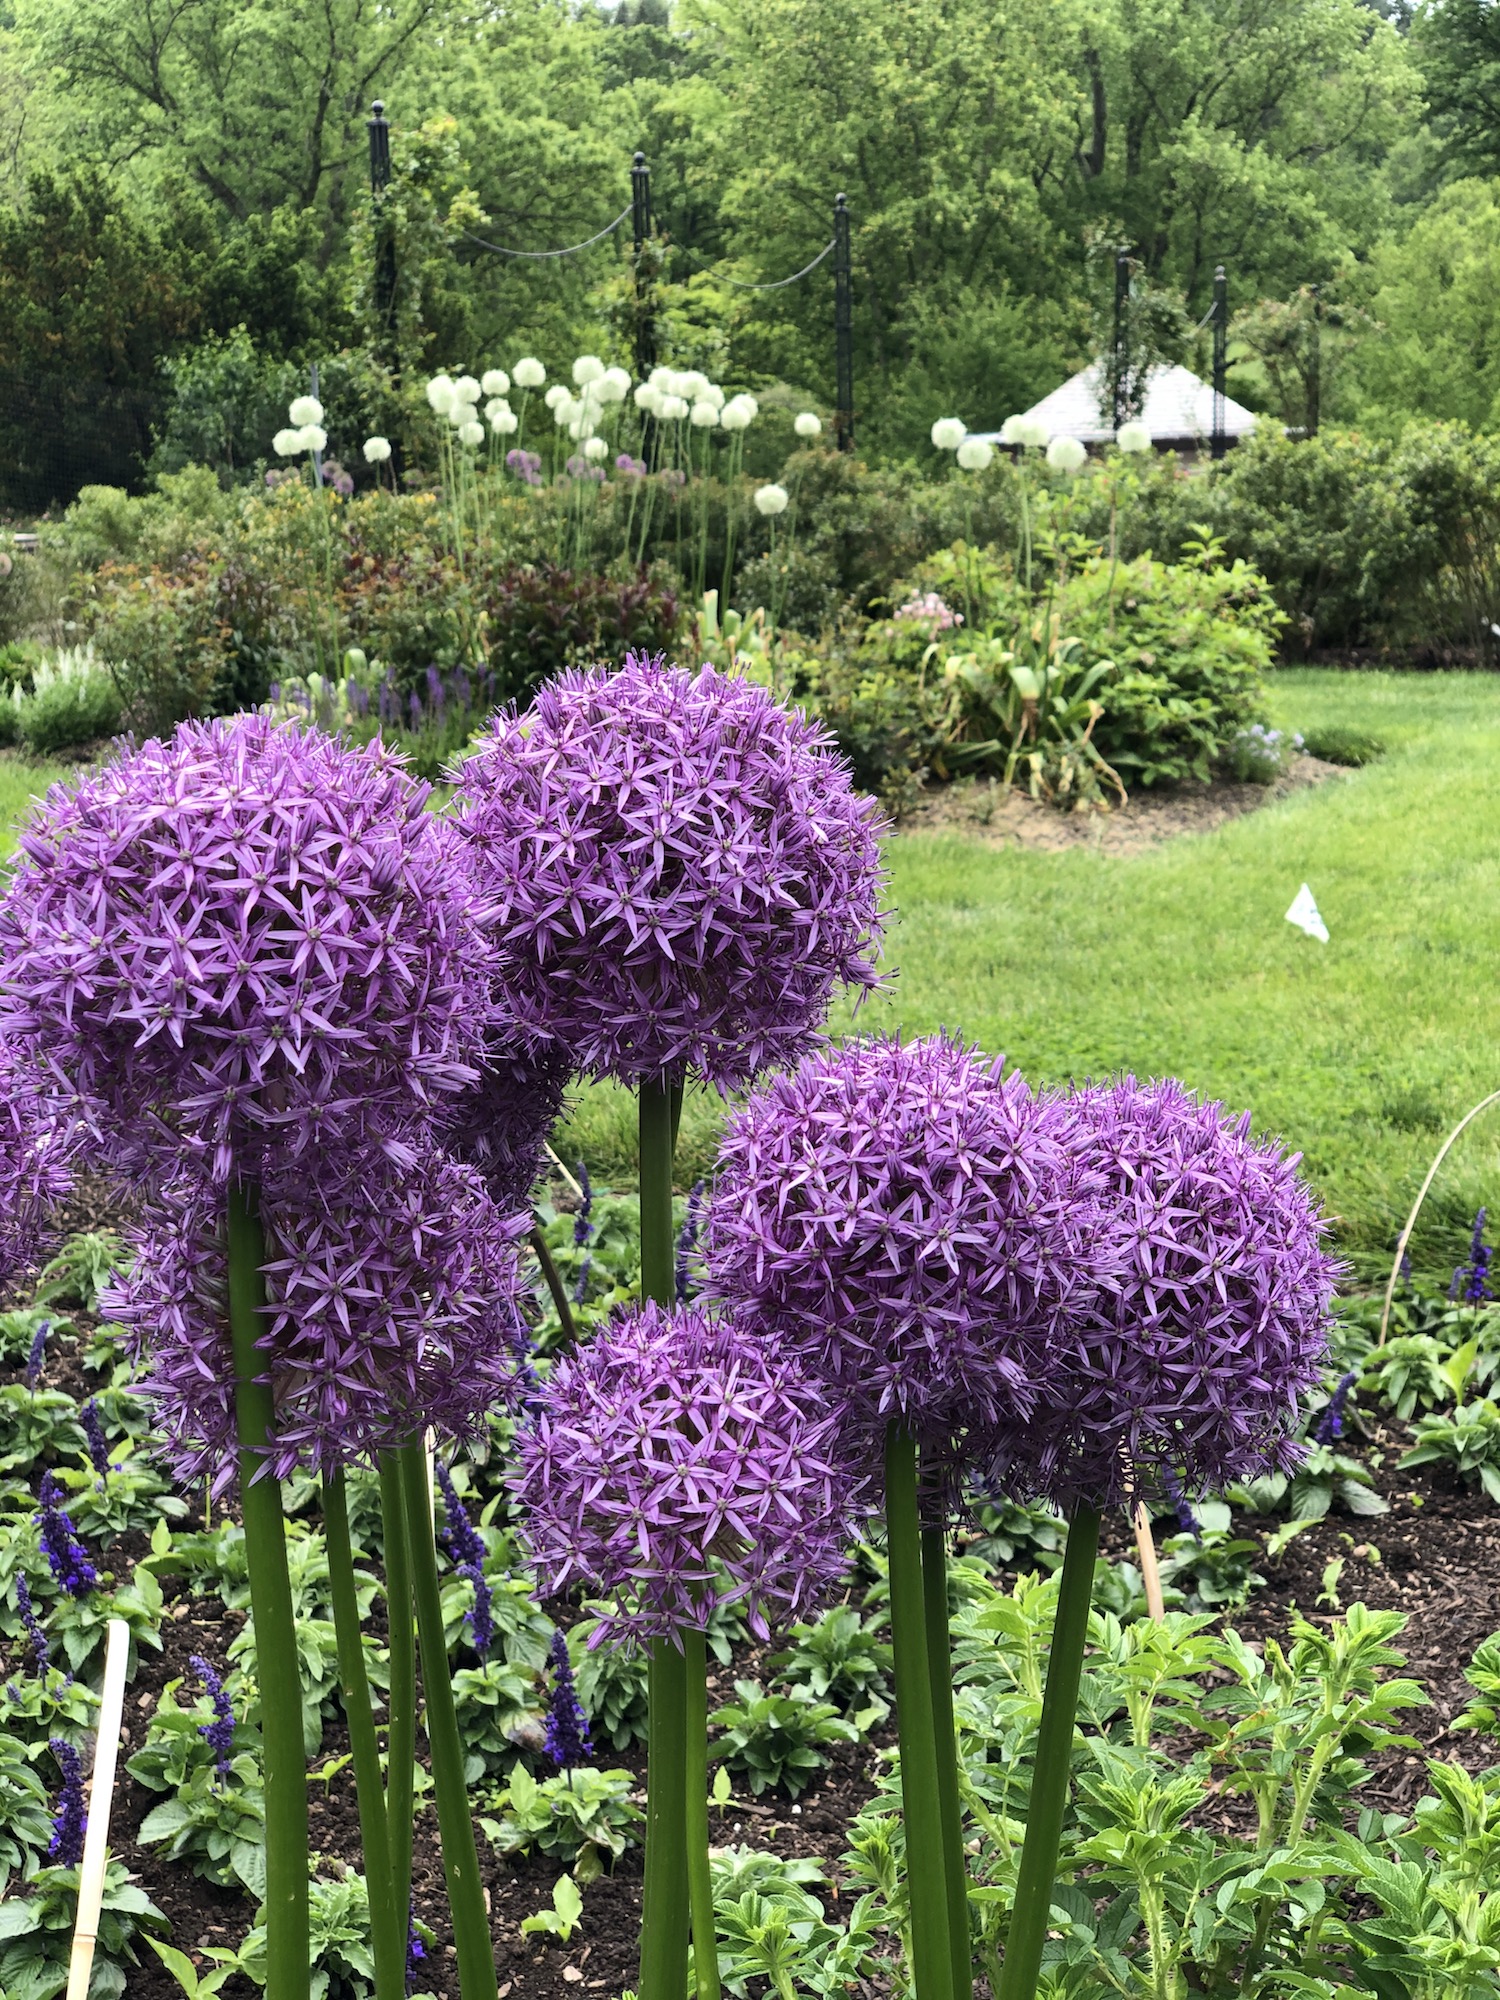 A group of allium flowers in bloom